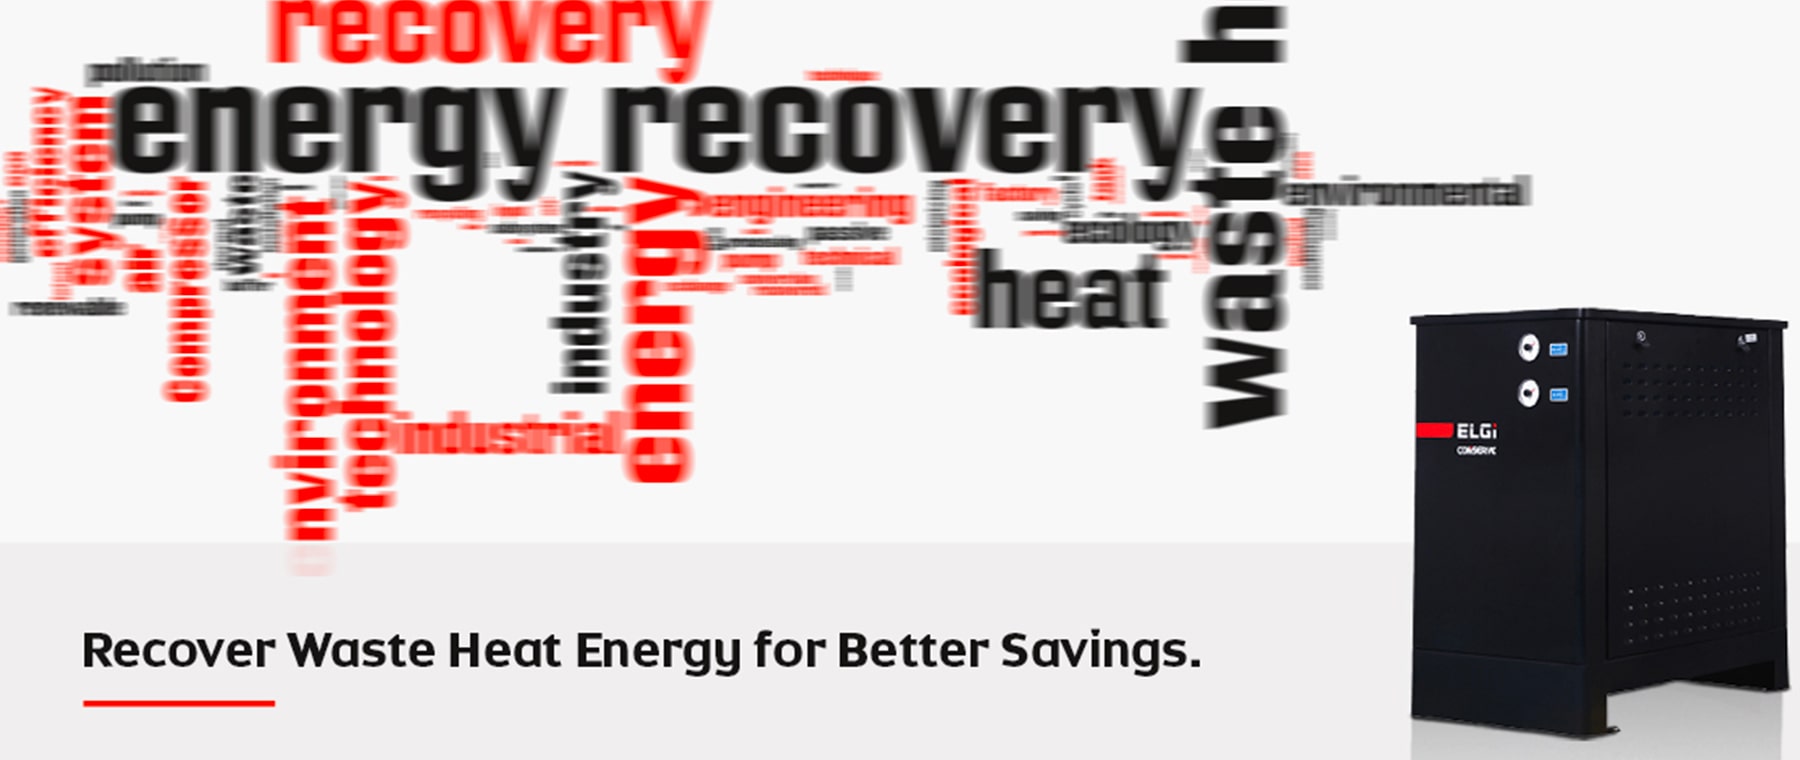 Recover Waste Heat Energy for Better Savings